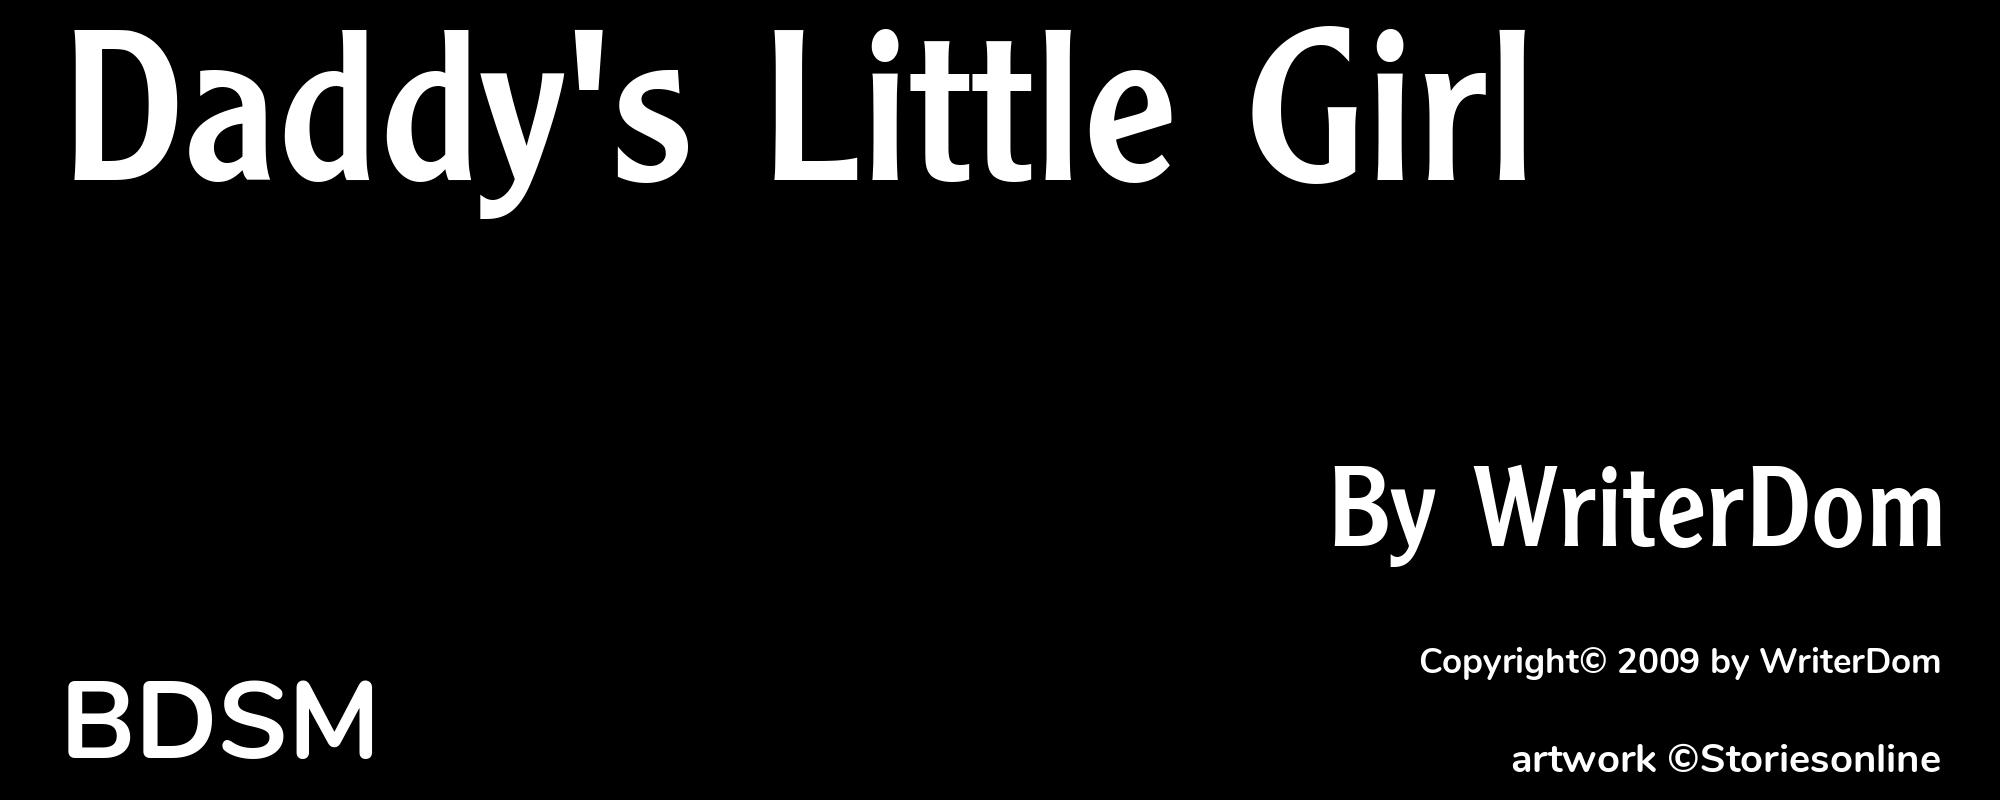 Daddy's Little Girl - Cover